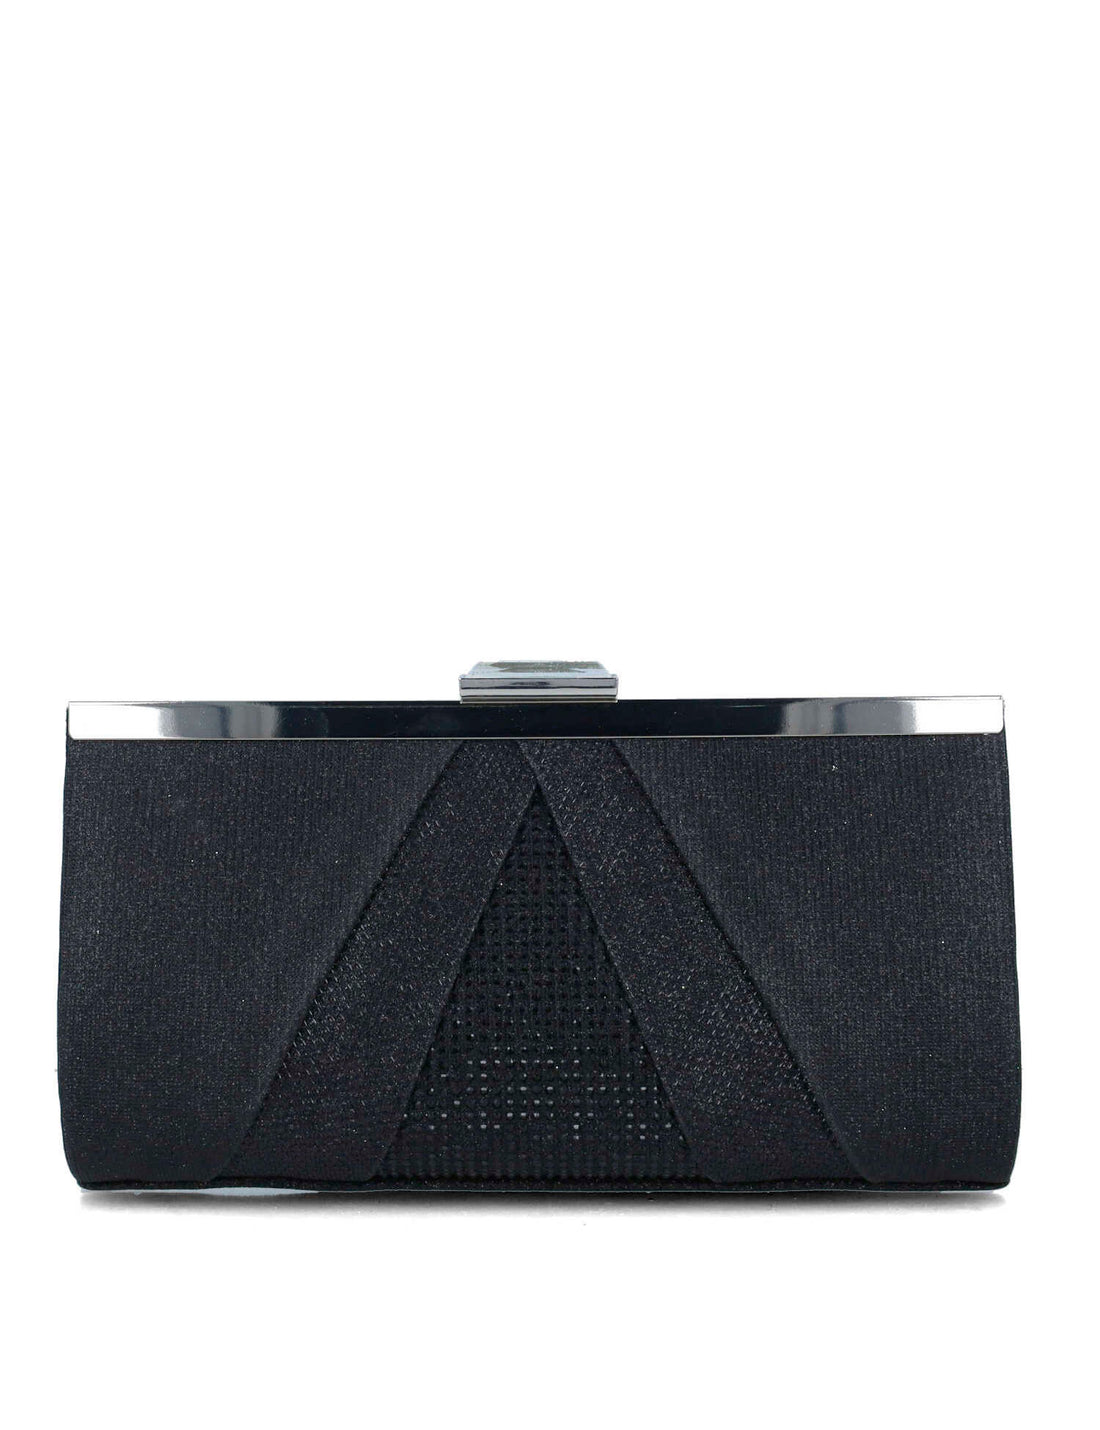 Black Clutch With Silver Hardware_85511_01_01